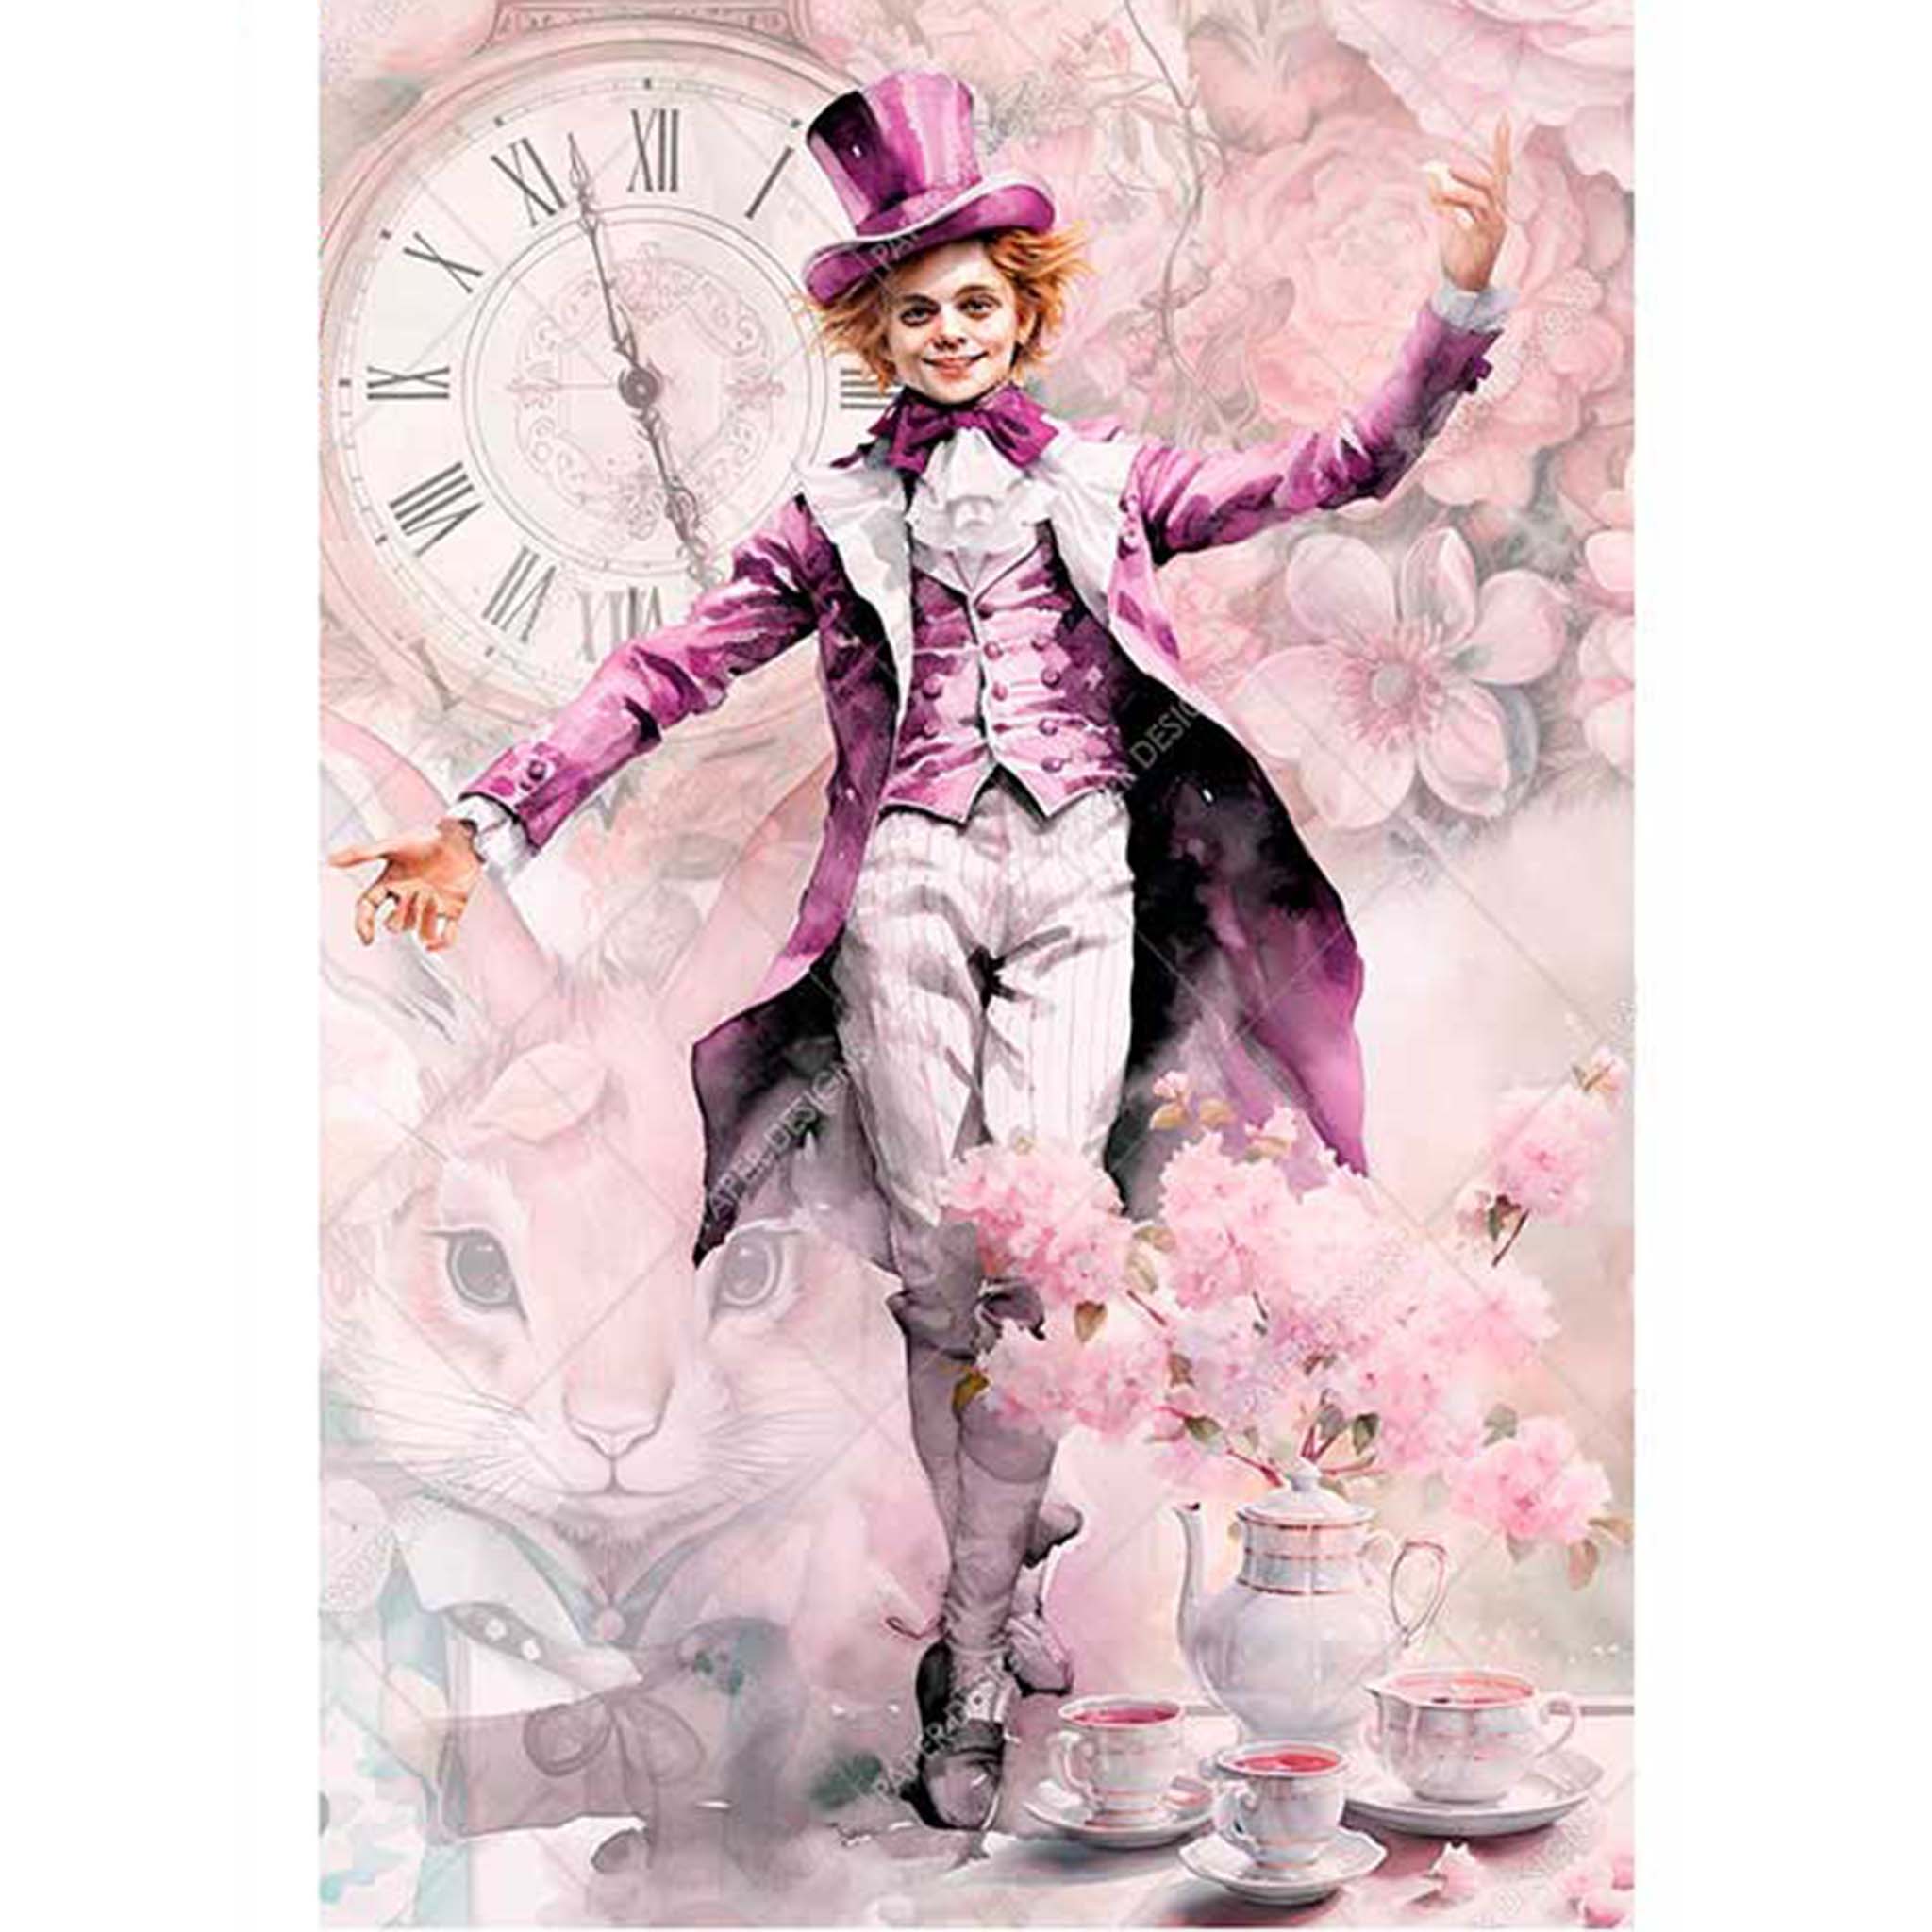 A1 rice paper design featuring The Mad Hatter and a tea set against a large clock face and rabit face in front of a pink floral background. White borders are on the sides.